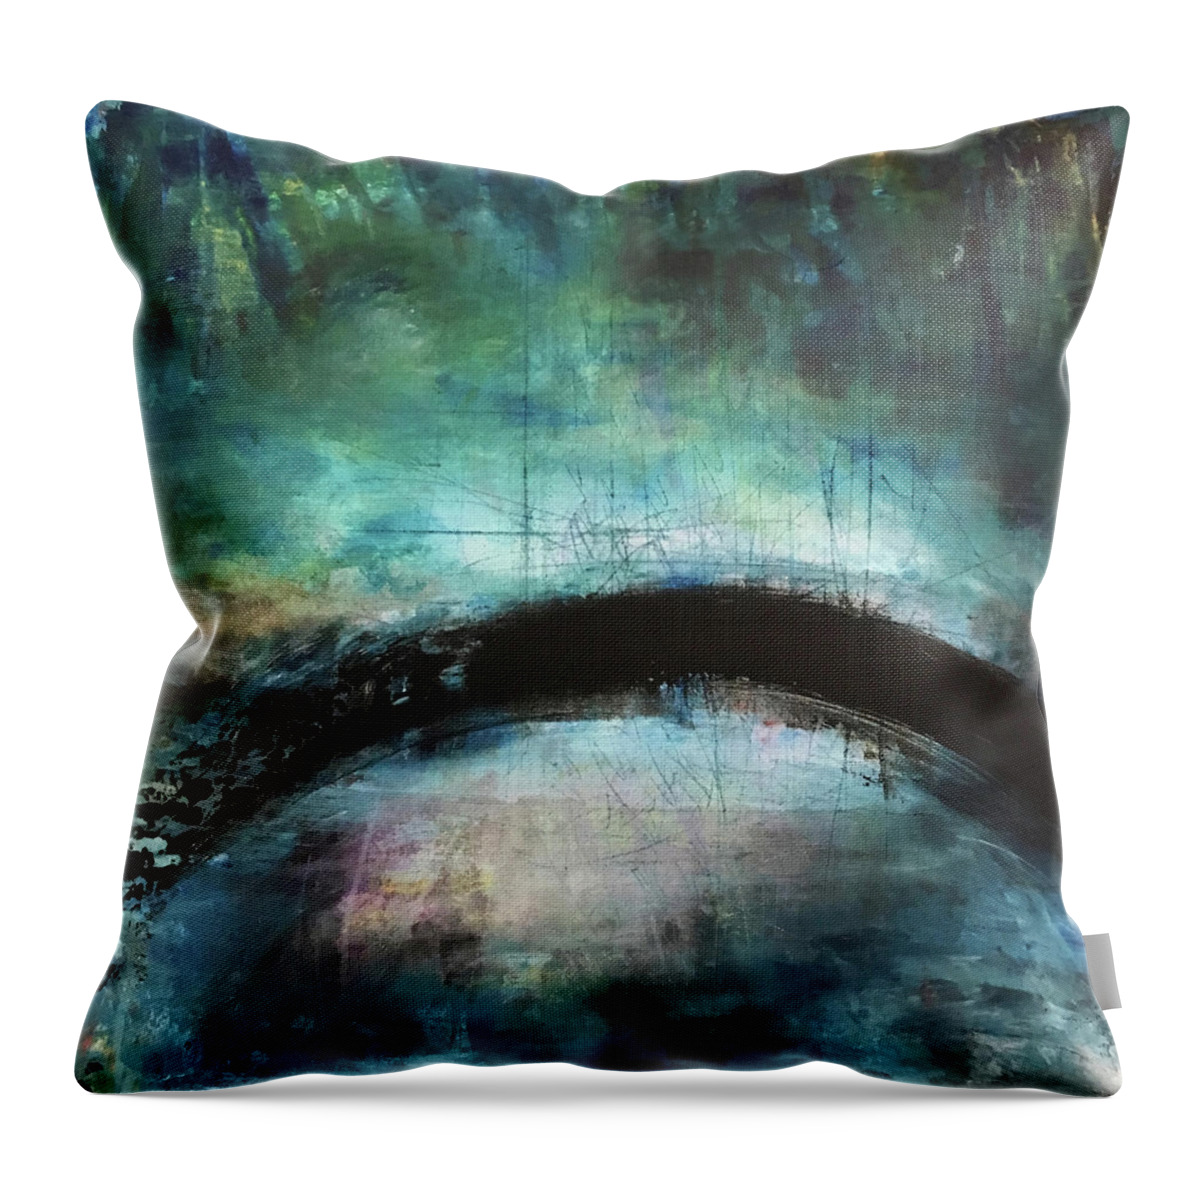 Abstract Art Throw Pillow featuring the painting Awe Surrenders by Rodney Frederickson